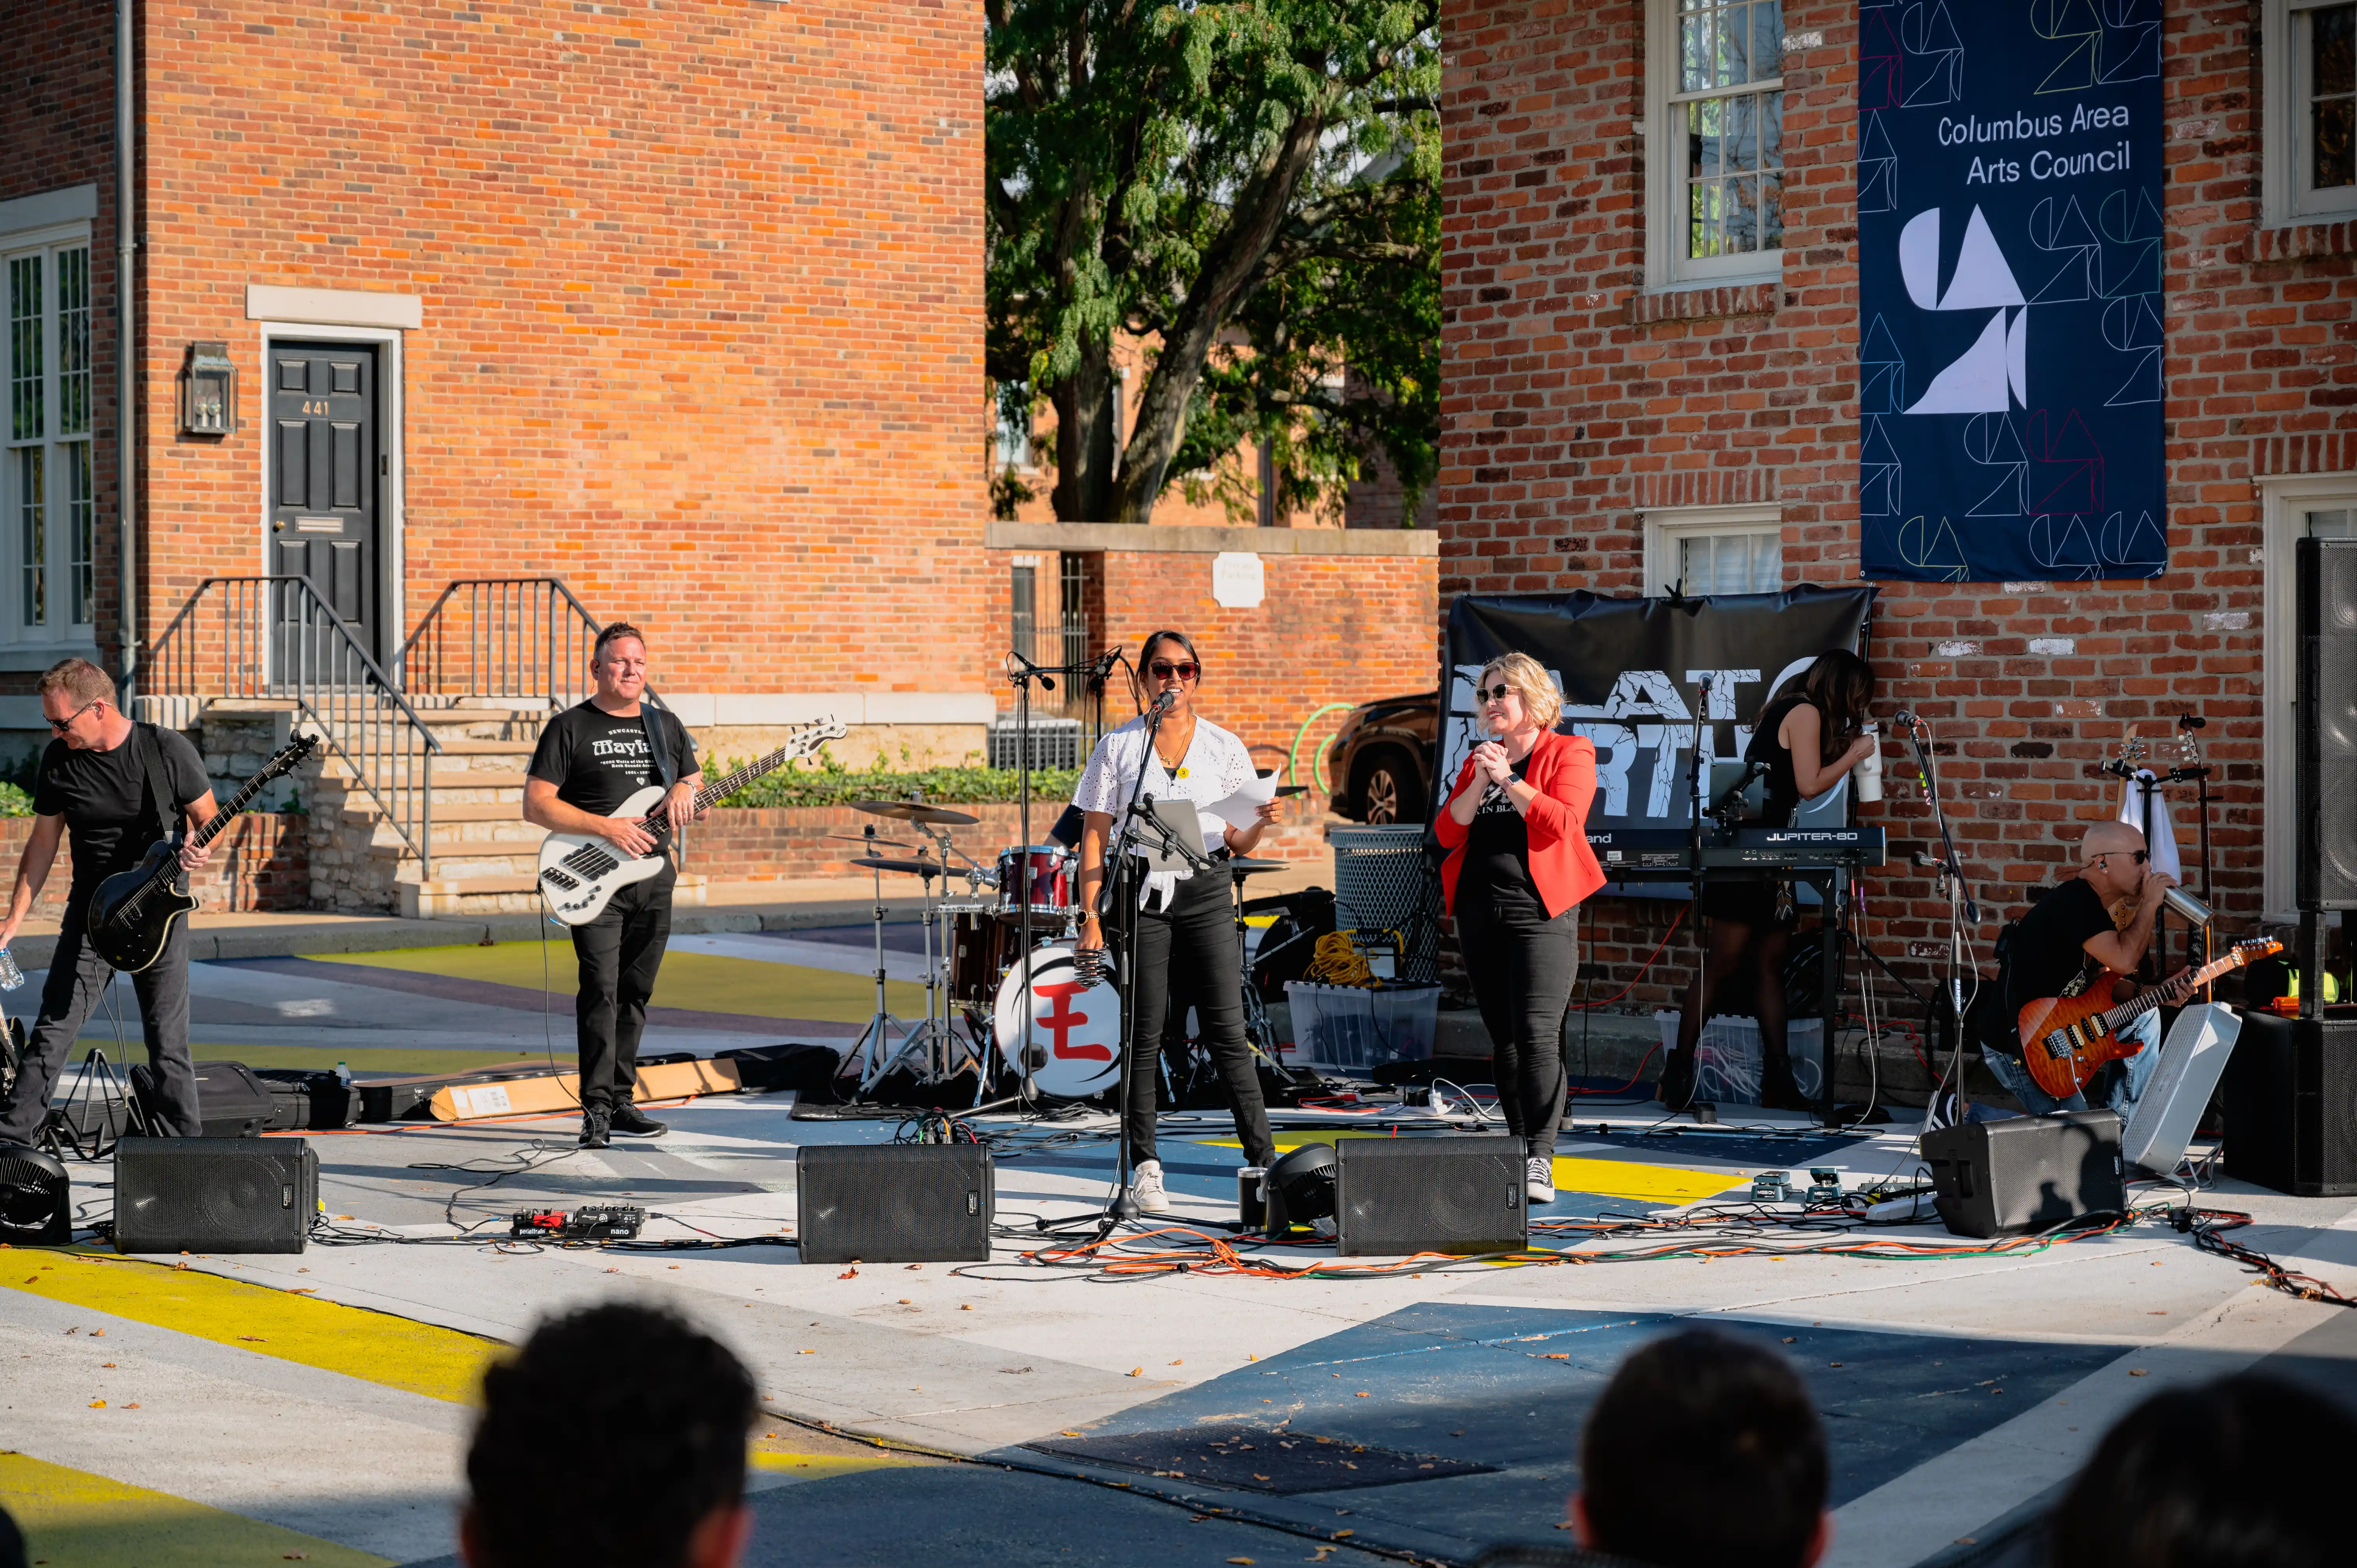 Band performing on an outdoor stage in front of a brick building with a banner that reads "Columbus Area Arts Council"